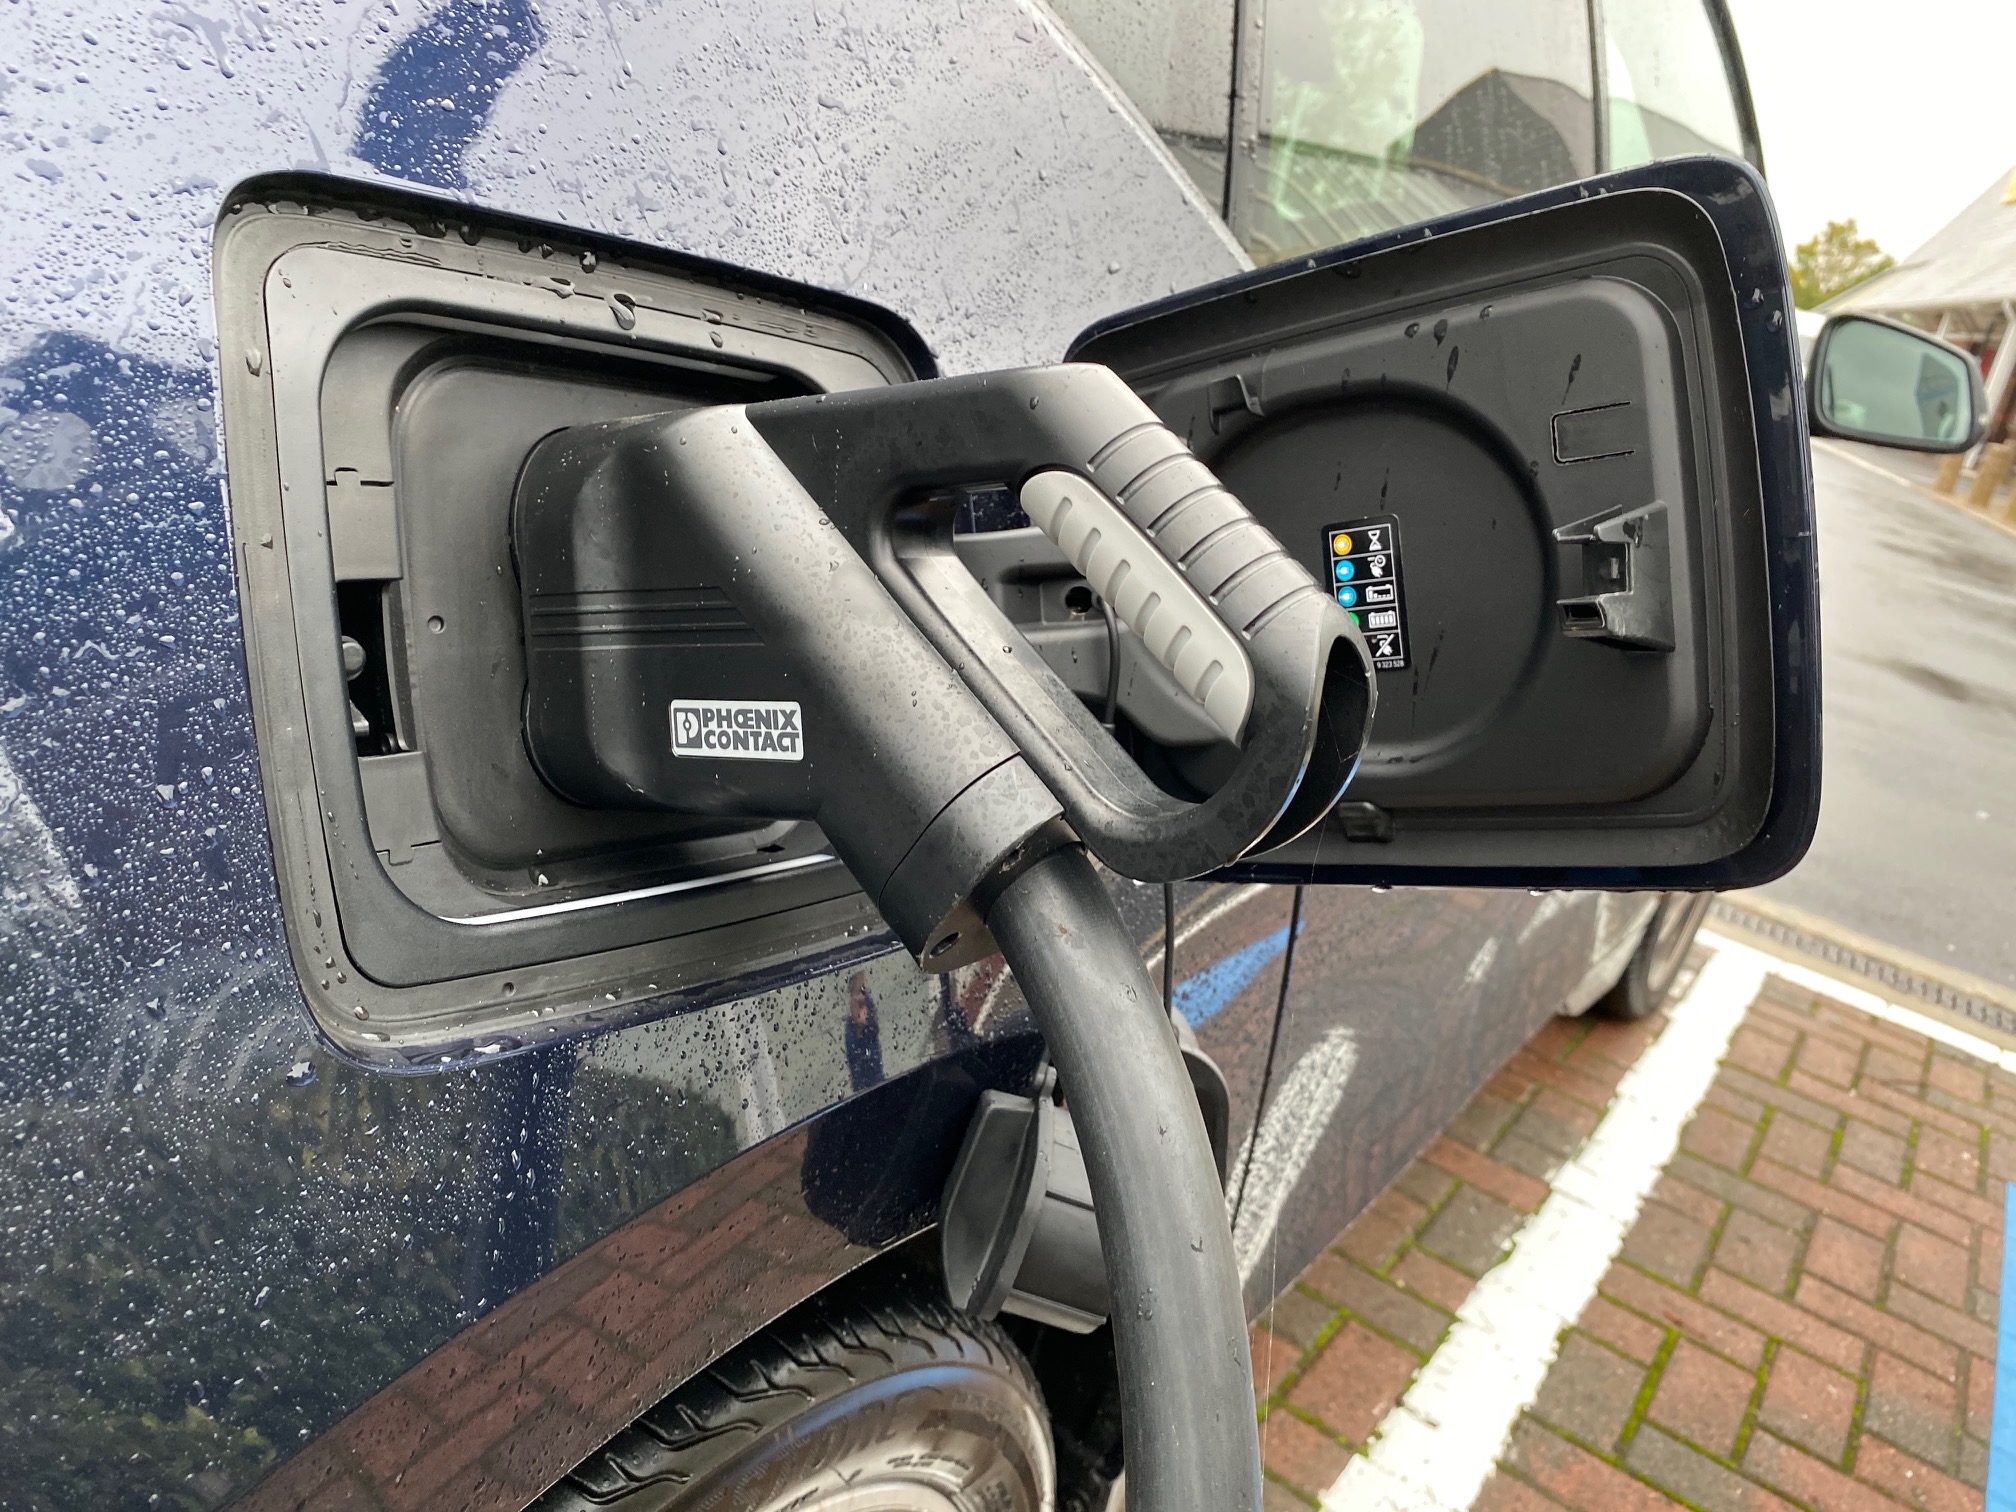 The i3 returns more than 200 miles on a single charge